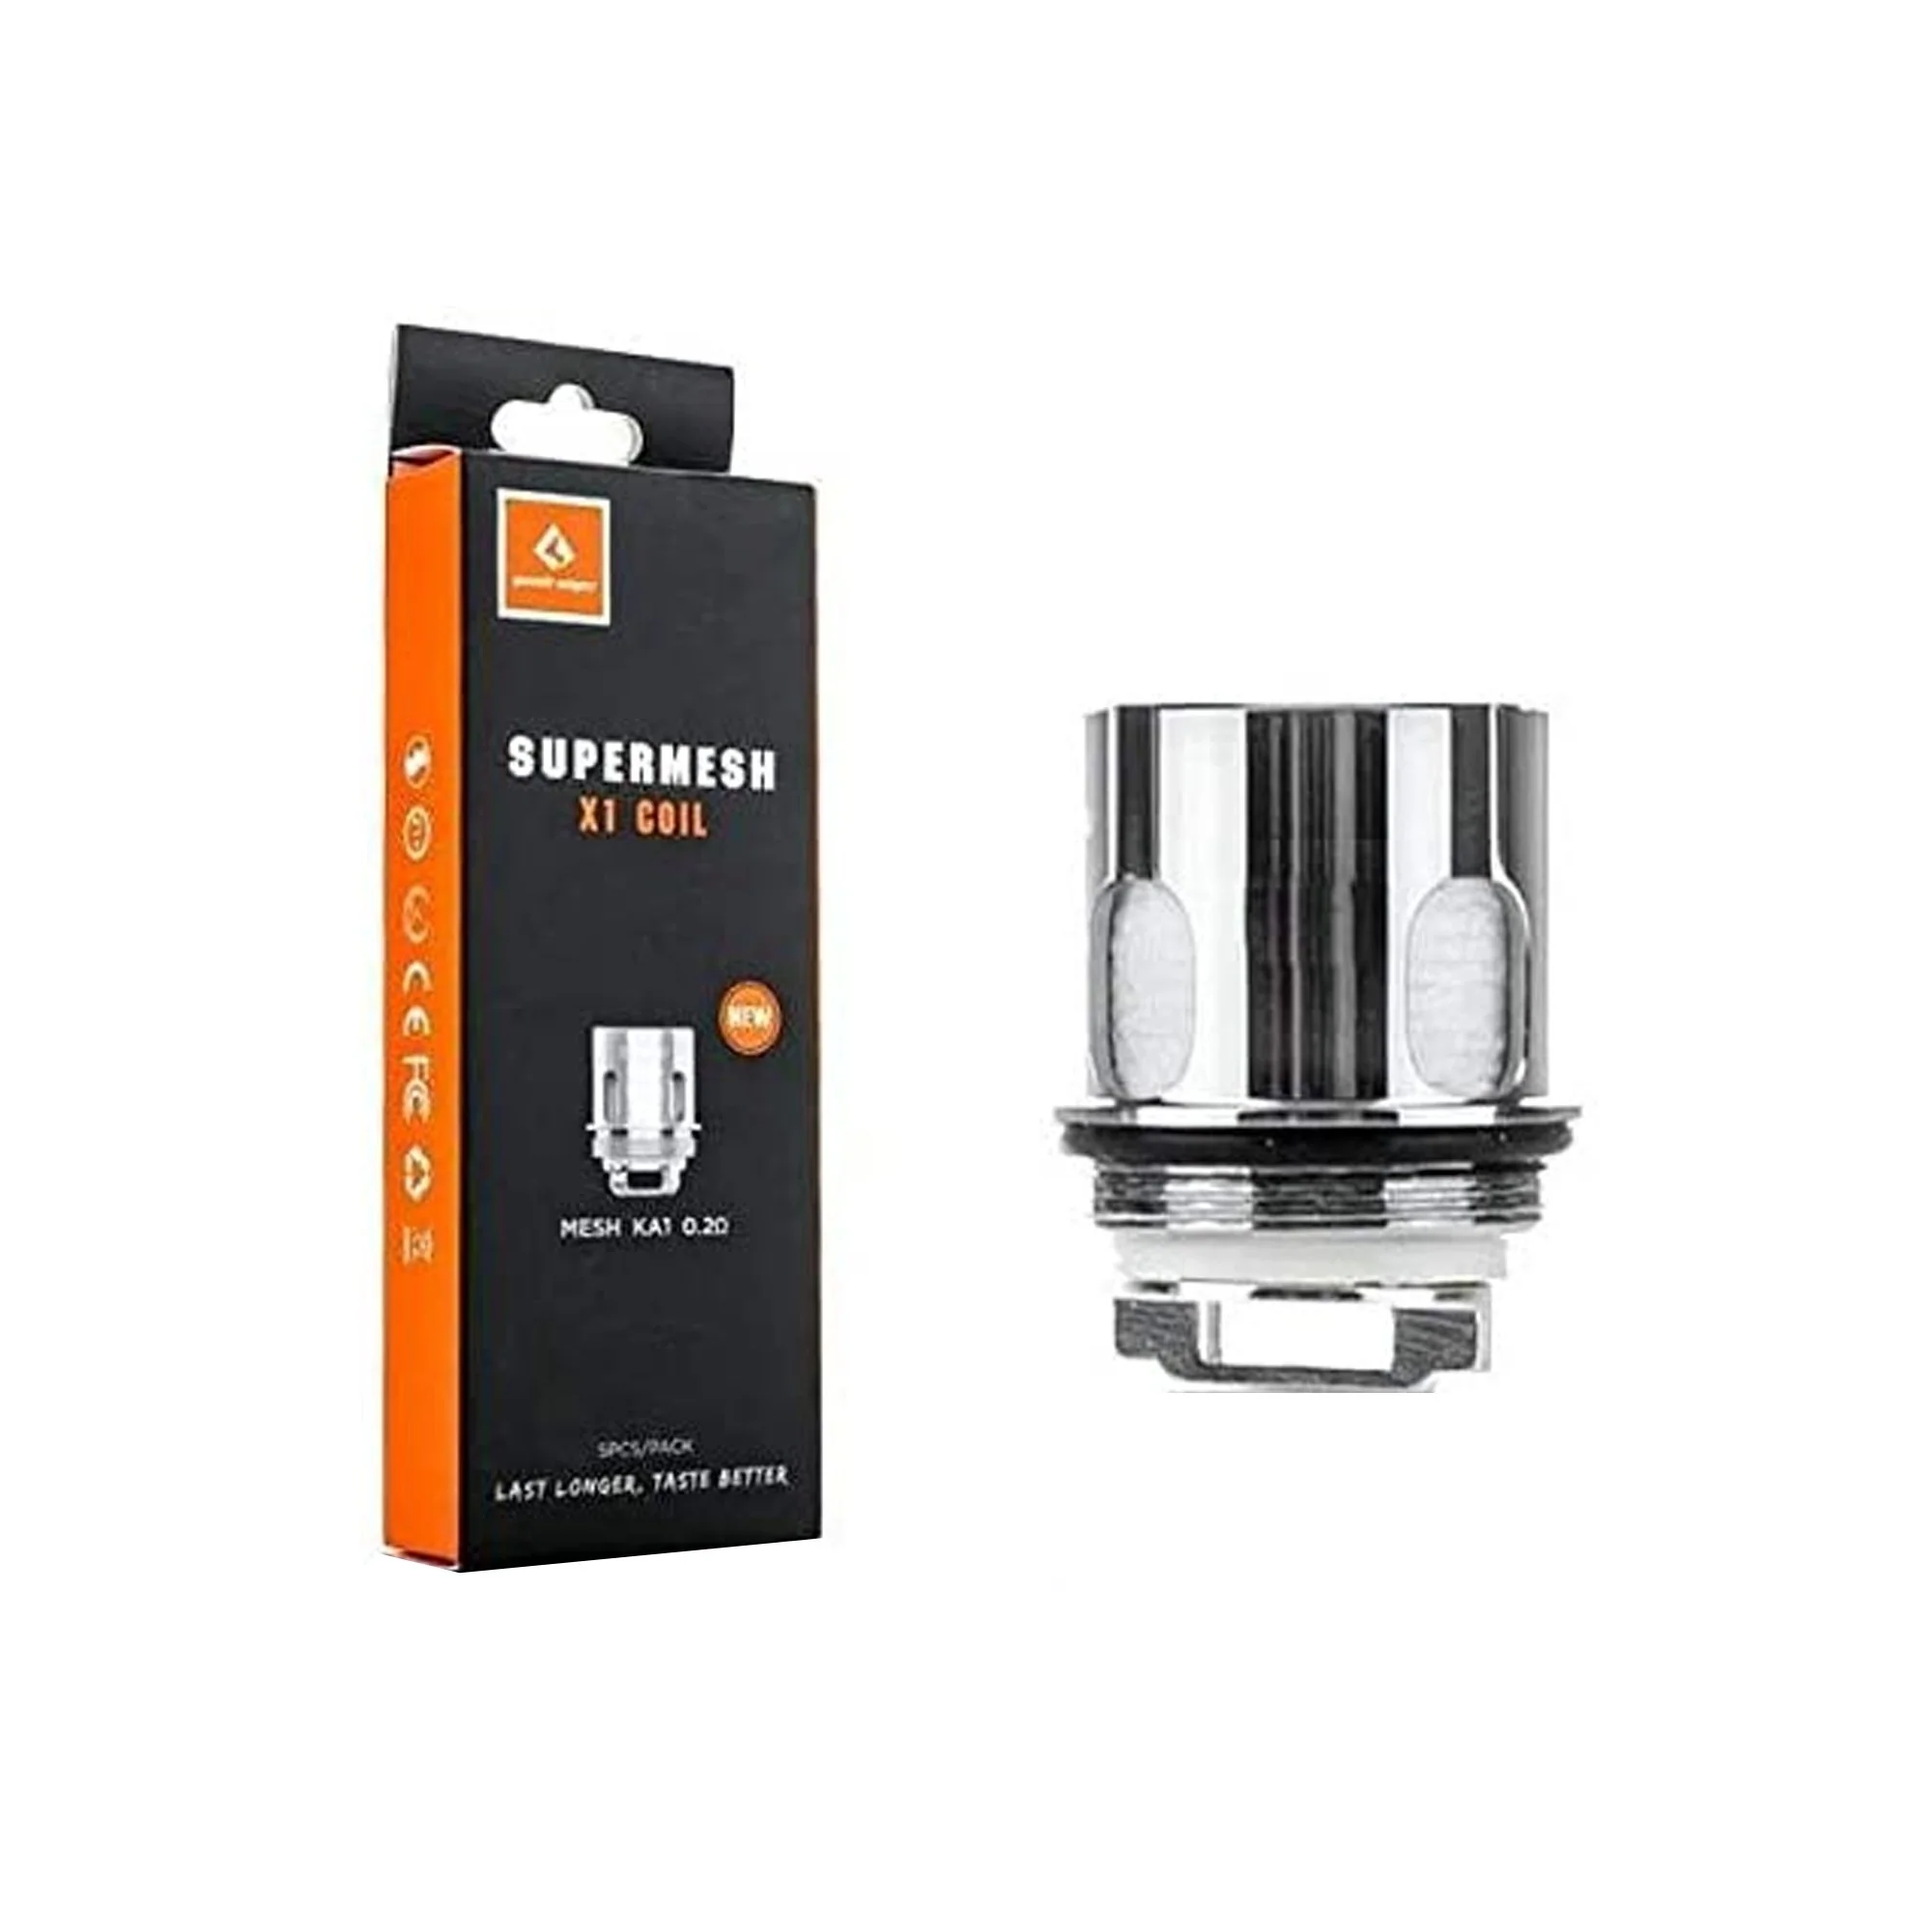 geekvape-super-mesh-ka1-02ohm-coil-pack-of-5-wolfvapes-wolfvapescouk-x1-02ohms-135924